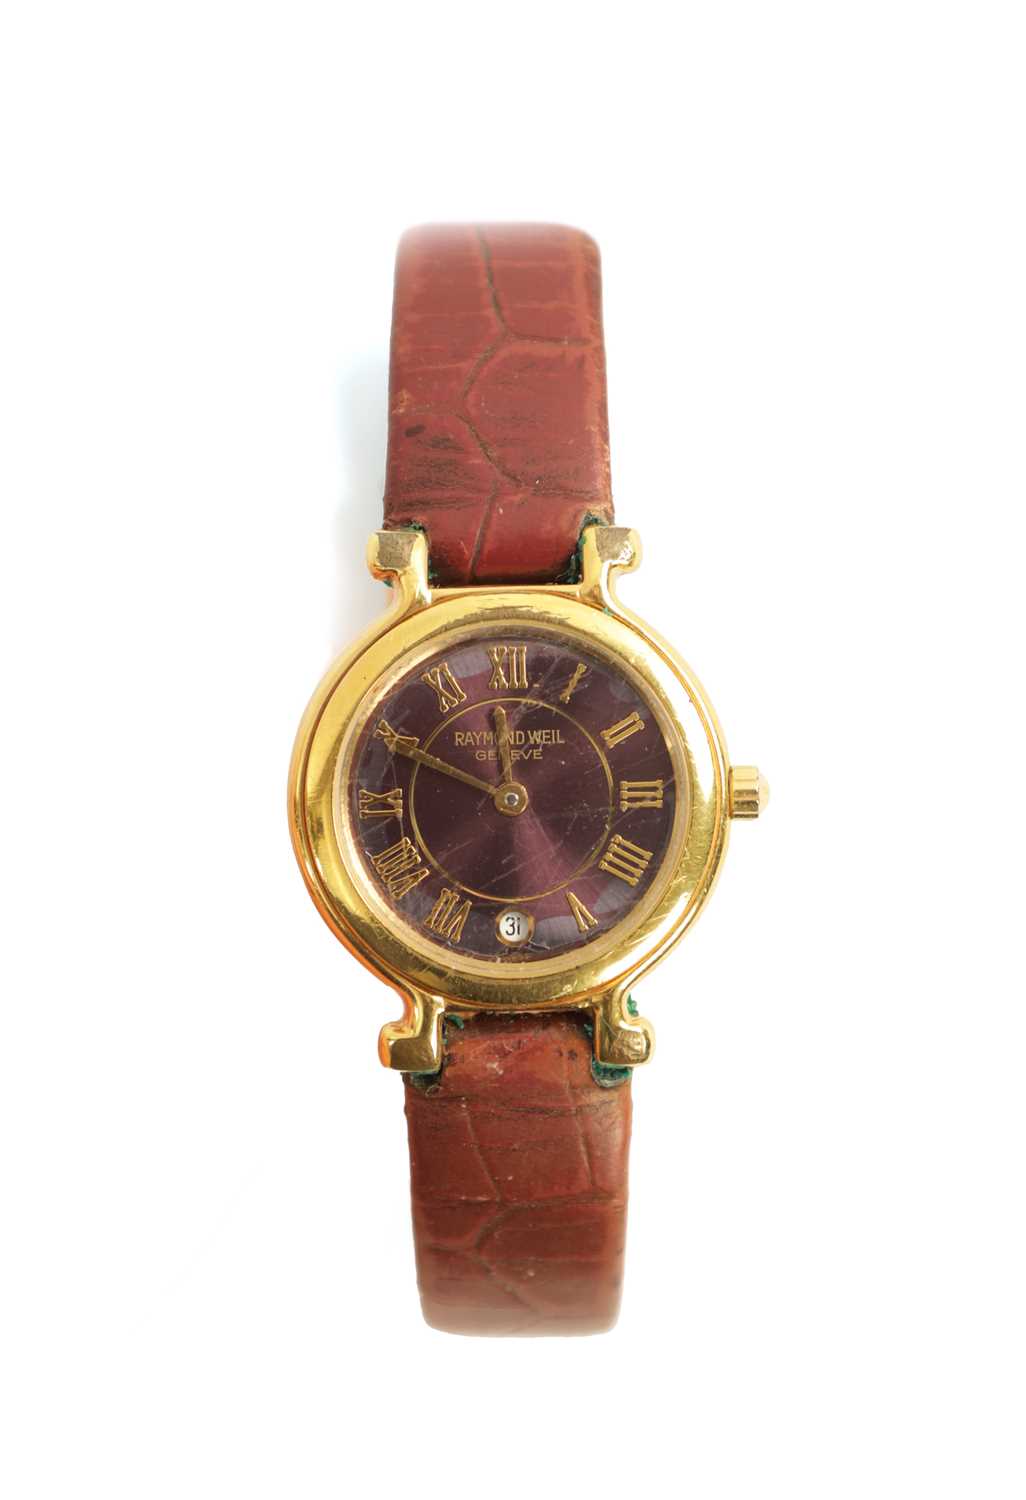 A RAYMOND WEIL 18CT GOLDPLATED LADIES WATCH PURPLE DIAL MODEL 9936